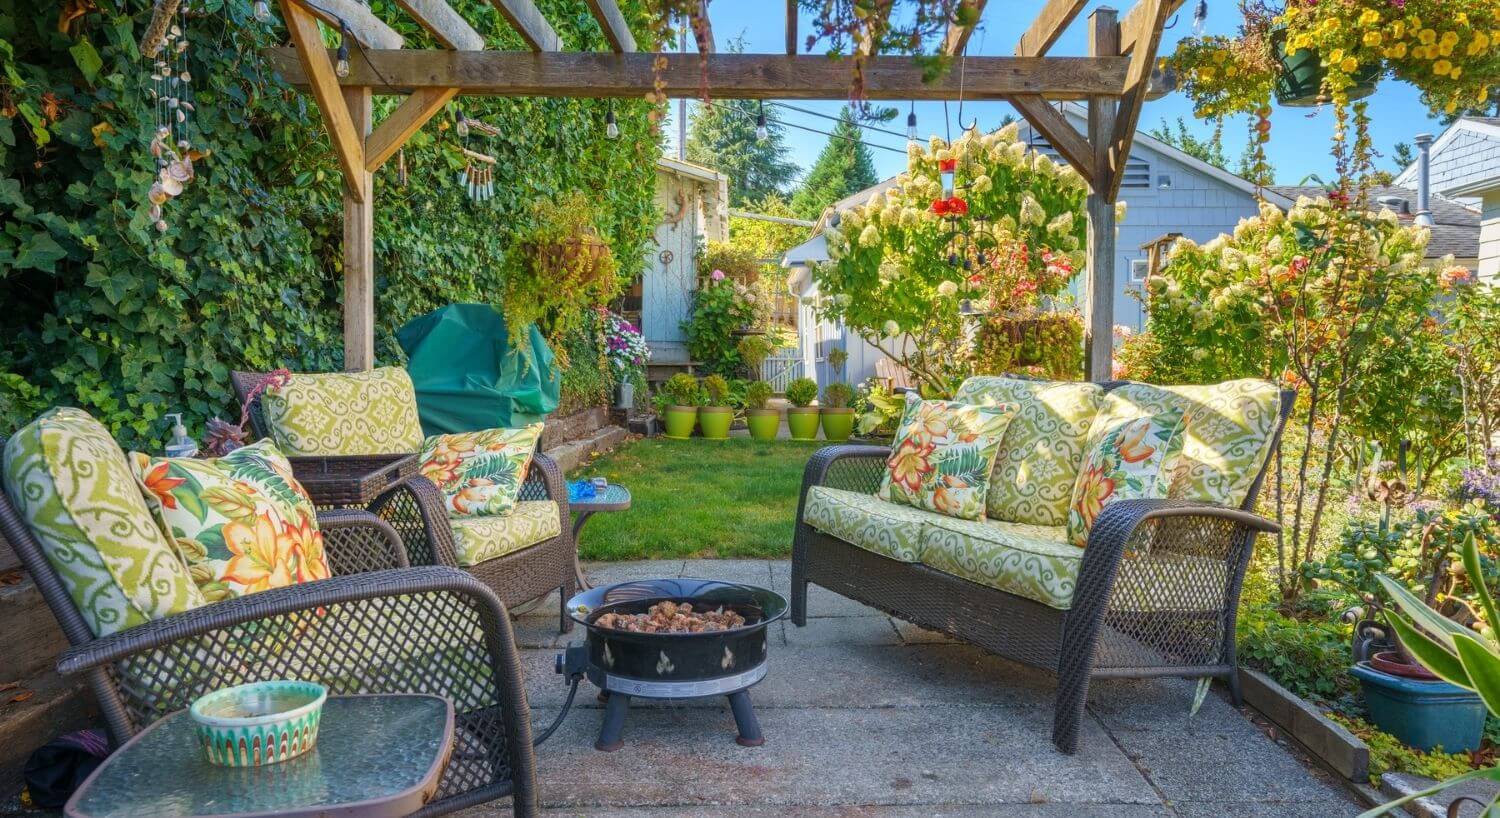 	Pretty exterior seating area with wicker furniture and pergola.